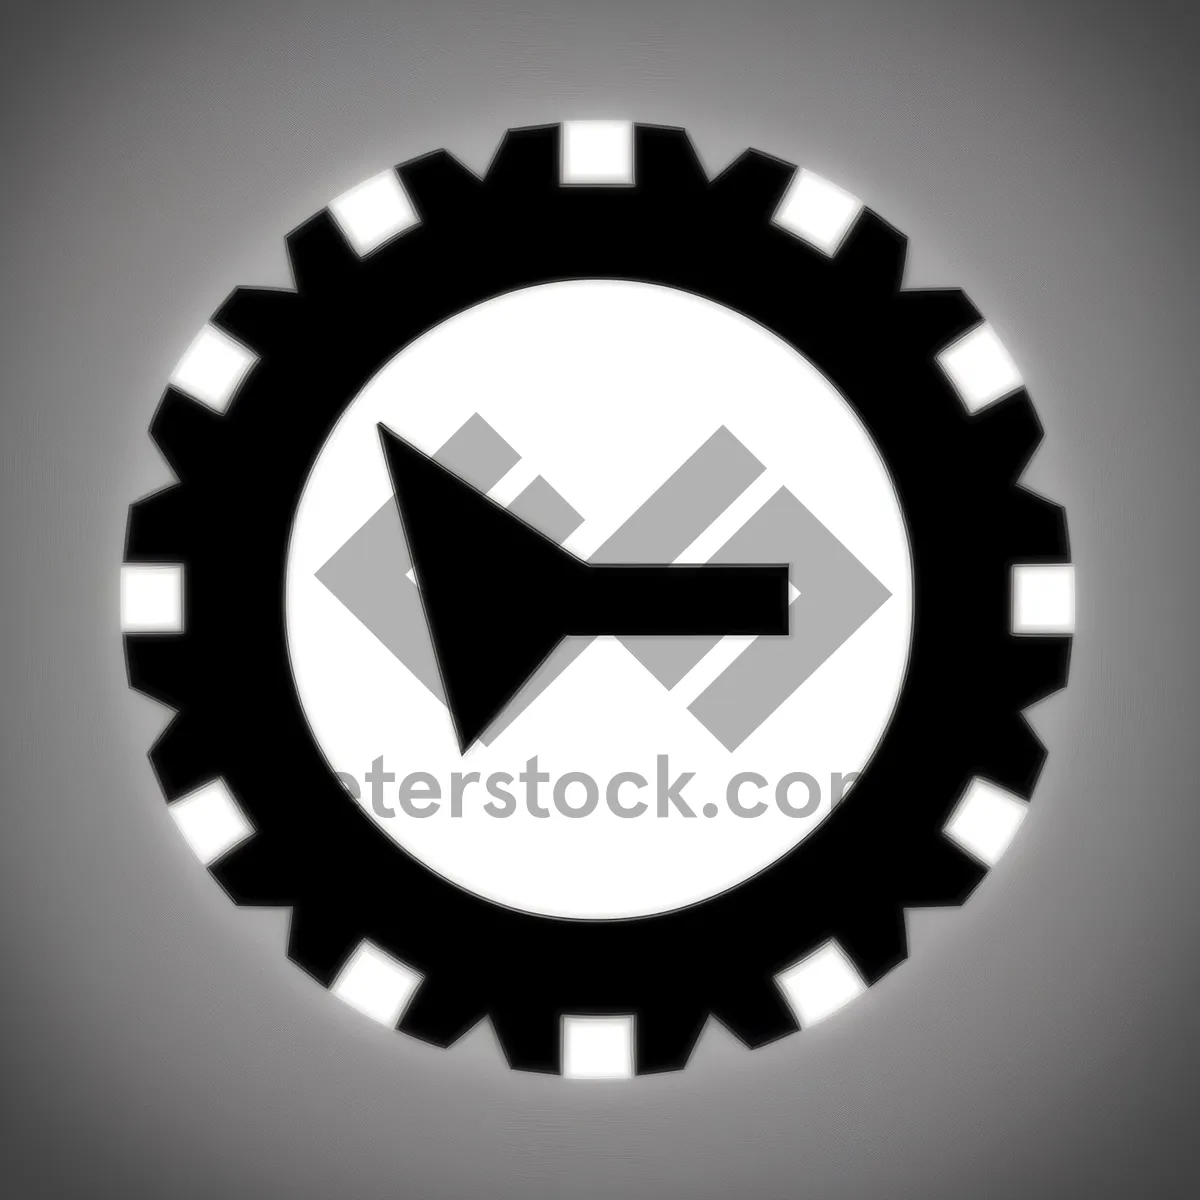 Picture of Shiny black round gear button icon.